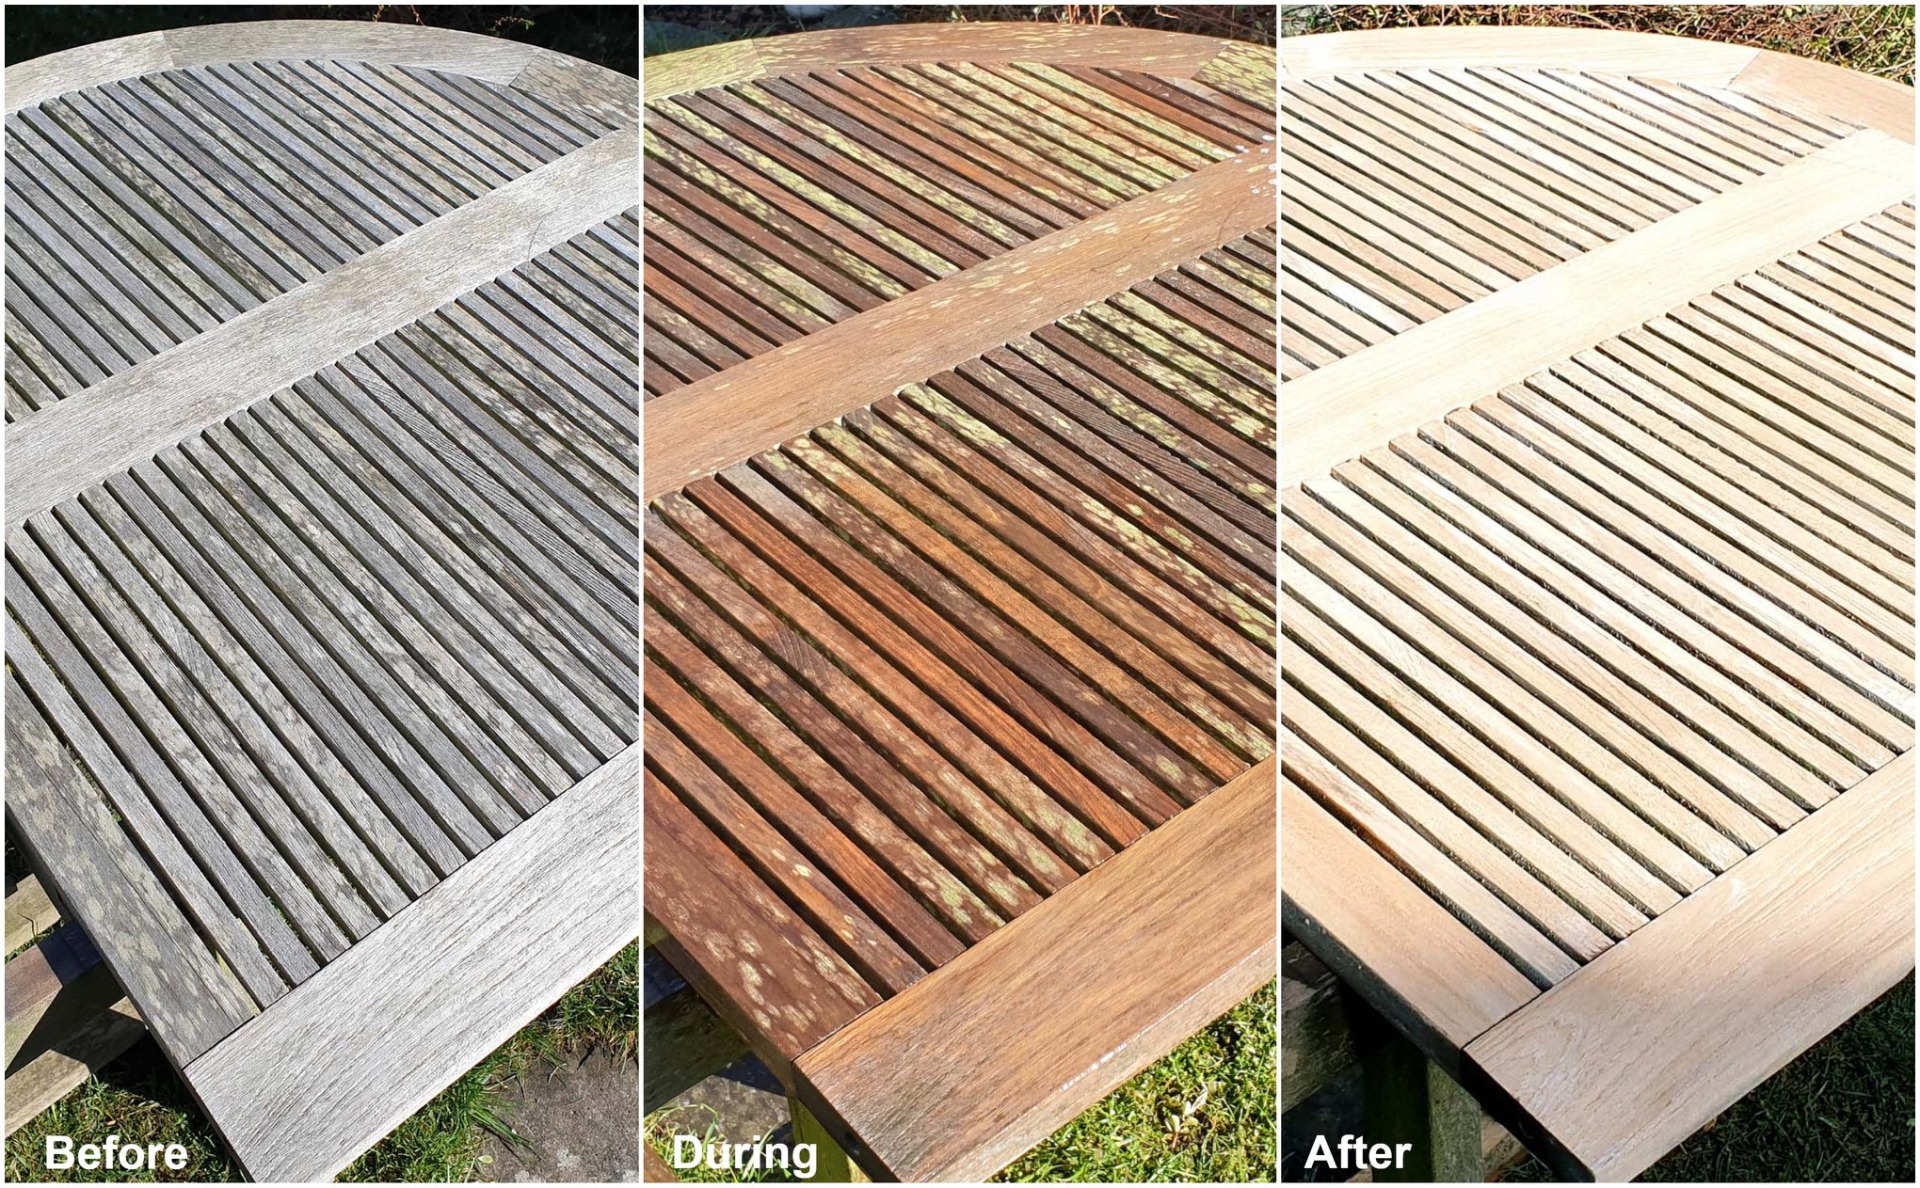 Before and after images of the kit being used on a teak table